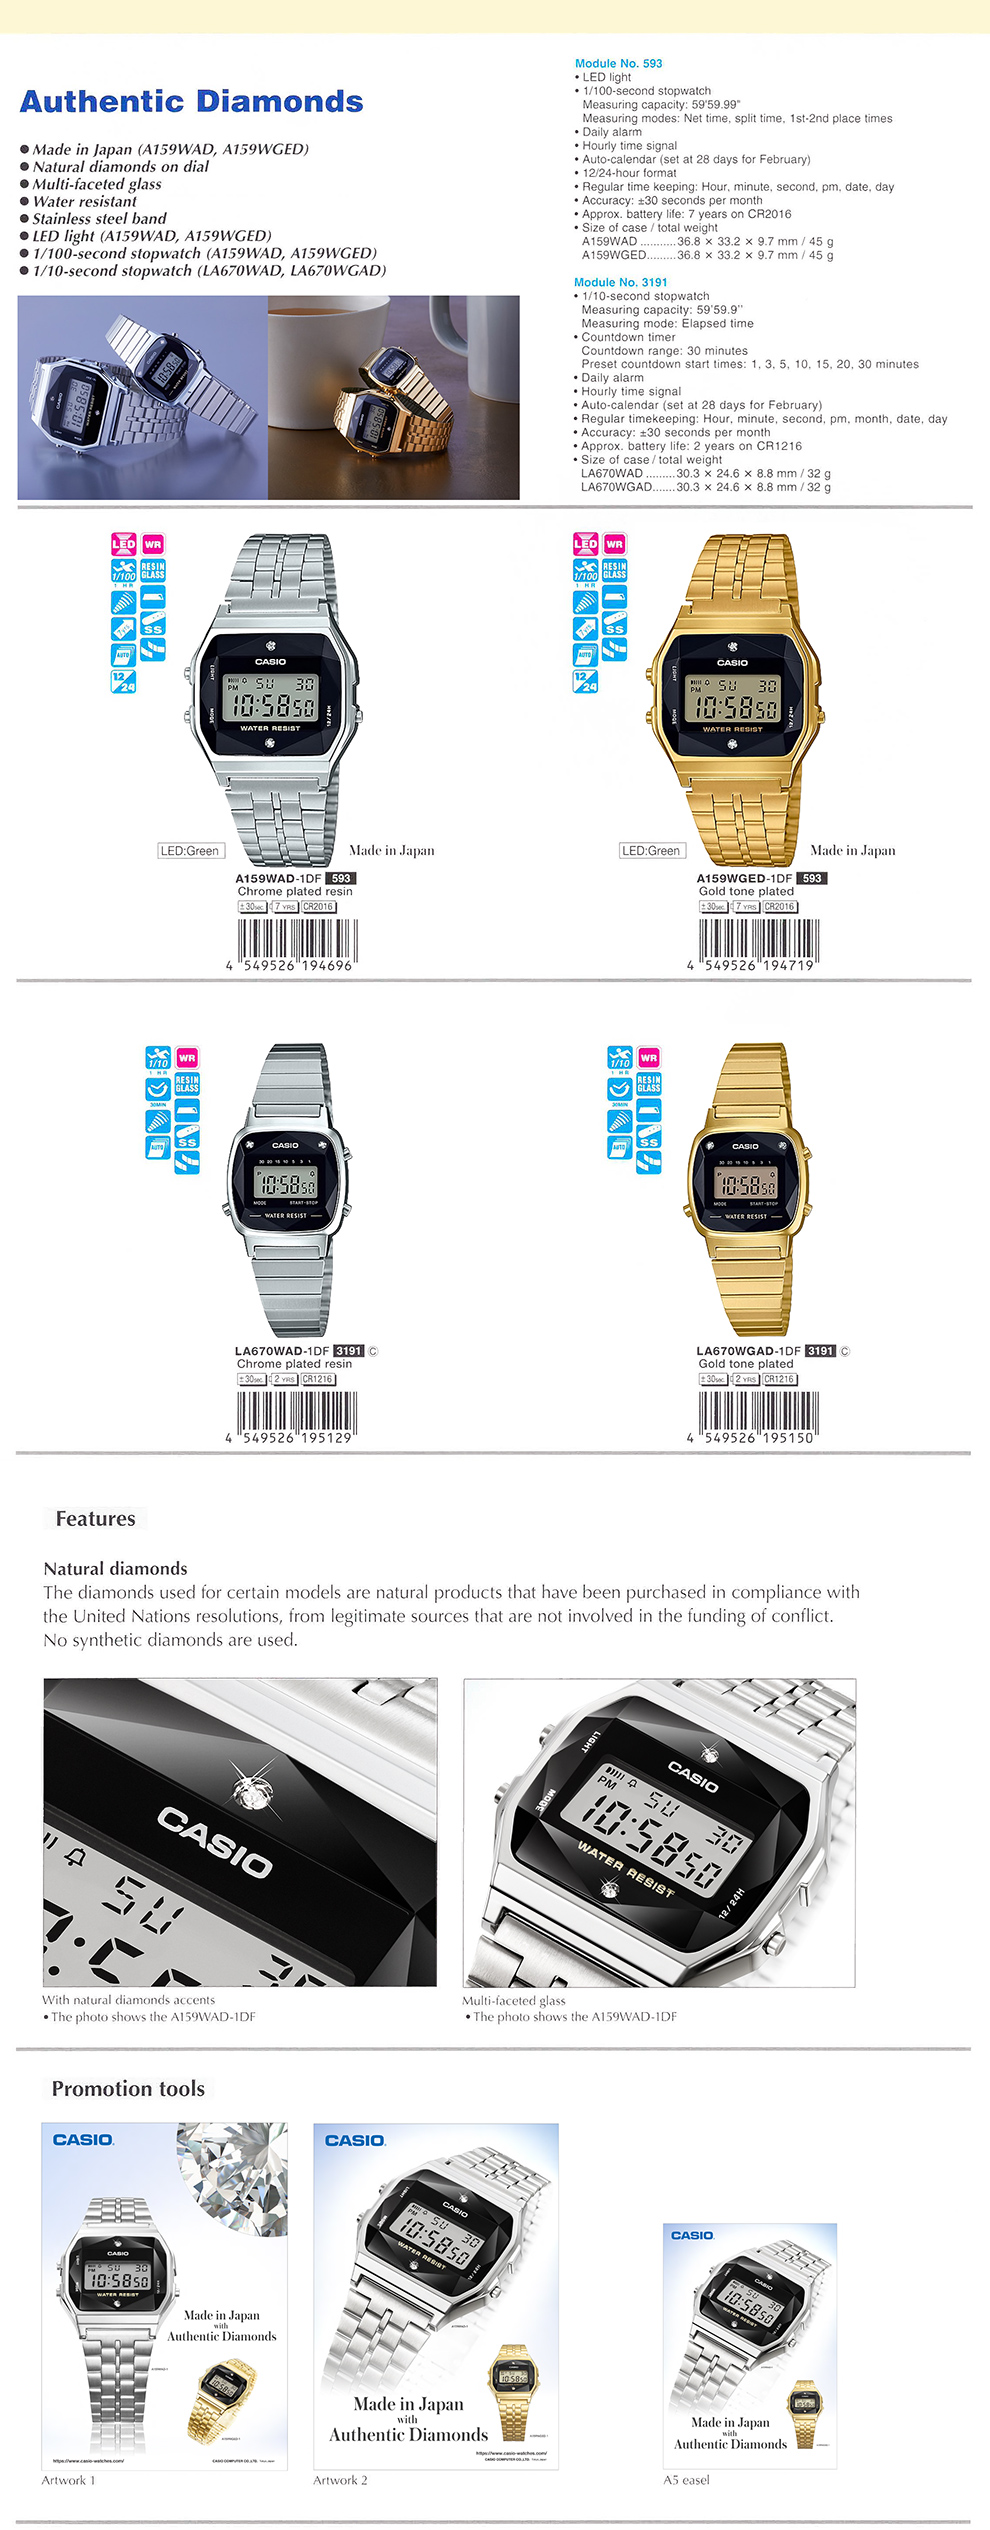 Standard Digital, Authentic Diamonds, Natural, Multi-faceted glass, Made in Japan, A159WAD-1, A159WGED-1, LA670WAD-1, LA670WGAD-1, A-159WAD-1, A-159WGED-1, LA-670WAD-1, LA-670WGAD-1